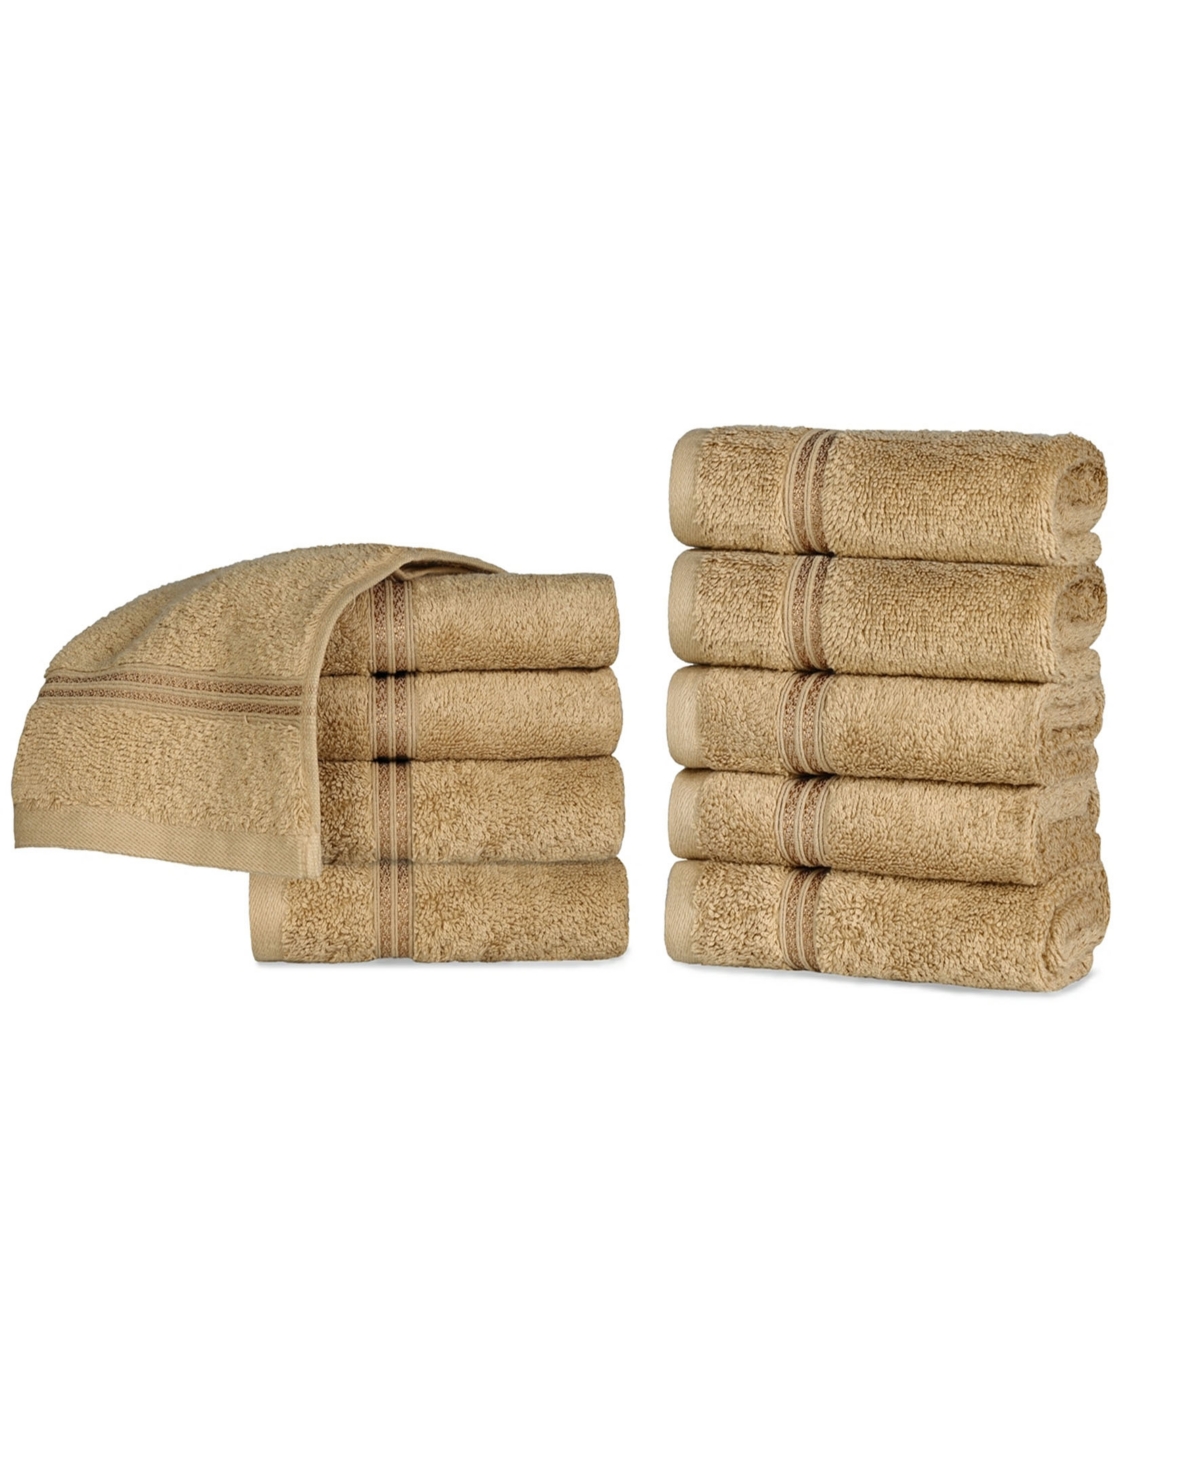 Superior Solid Quick Drying Absorbent 10 Piece Egyptian Cotton Face Towel Set Bedding In Toast